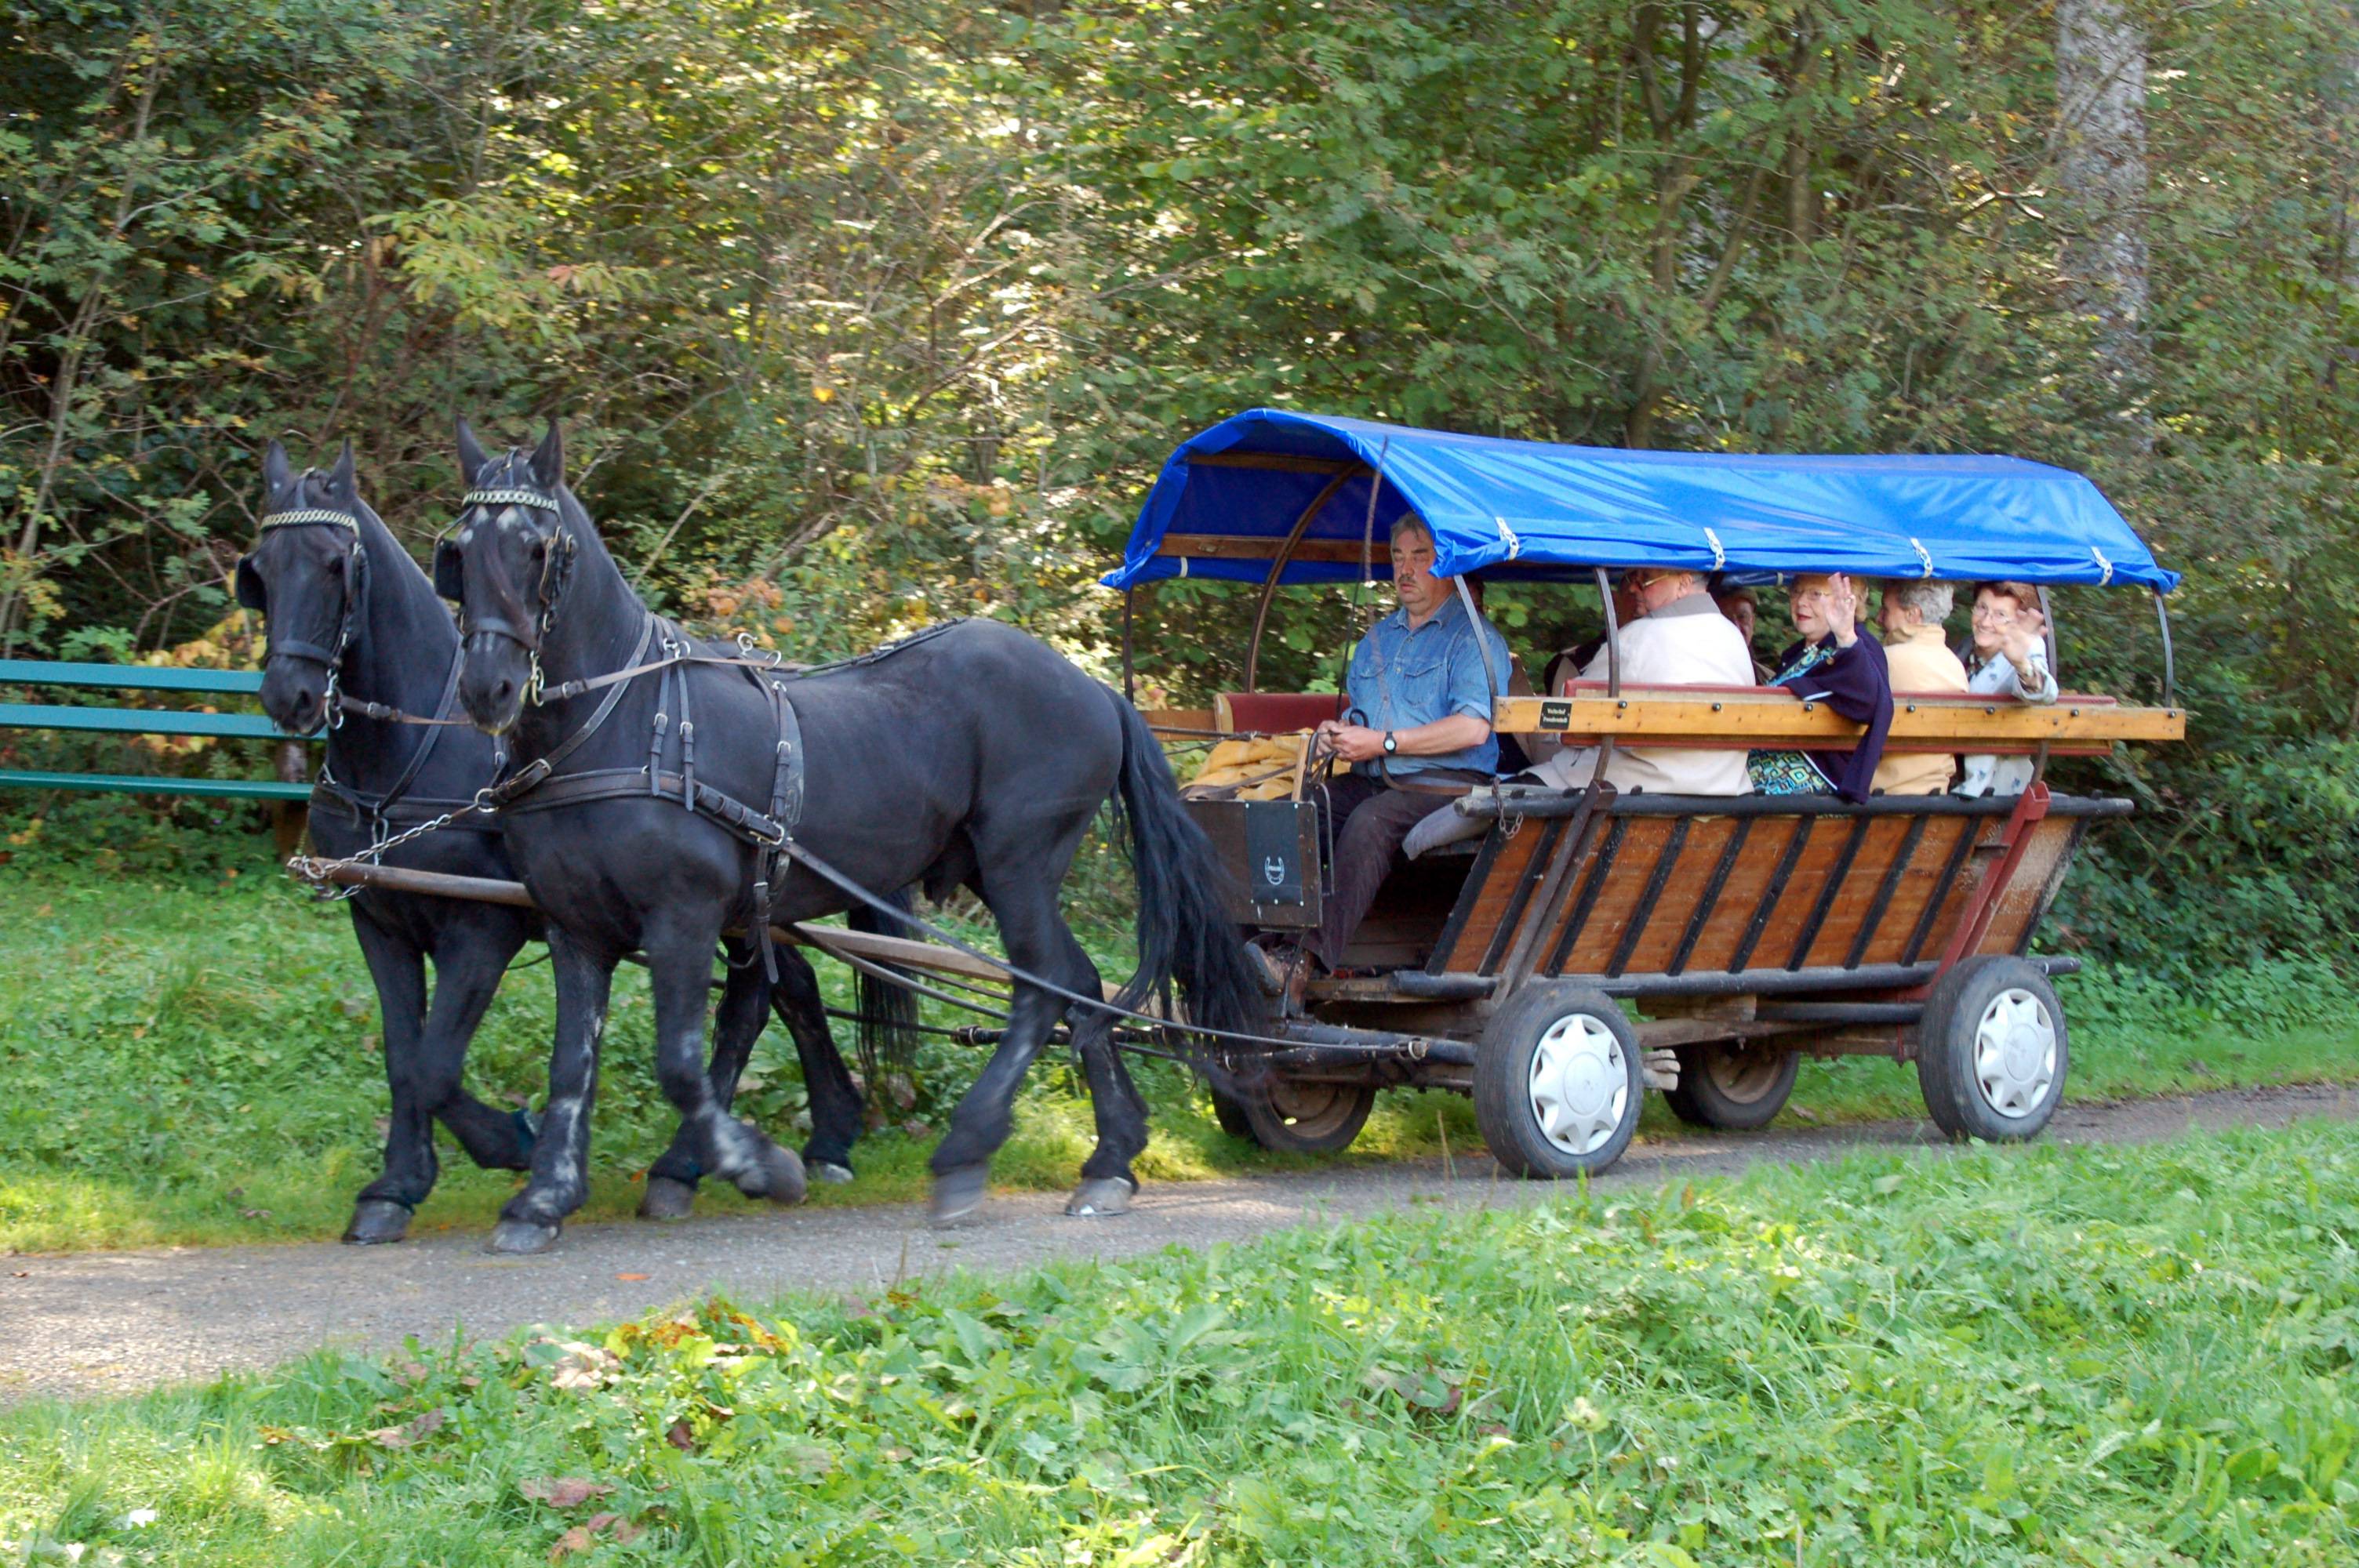 Horse carriage drives: Through the Black Forest to the beat of the horses - Hotel Grüner Wald